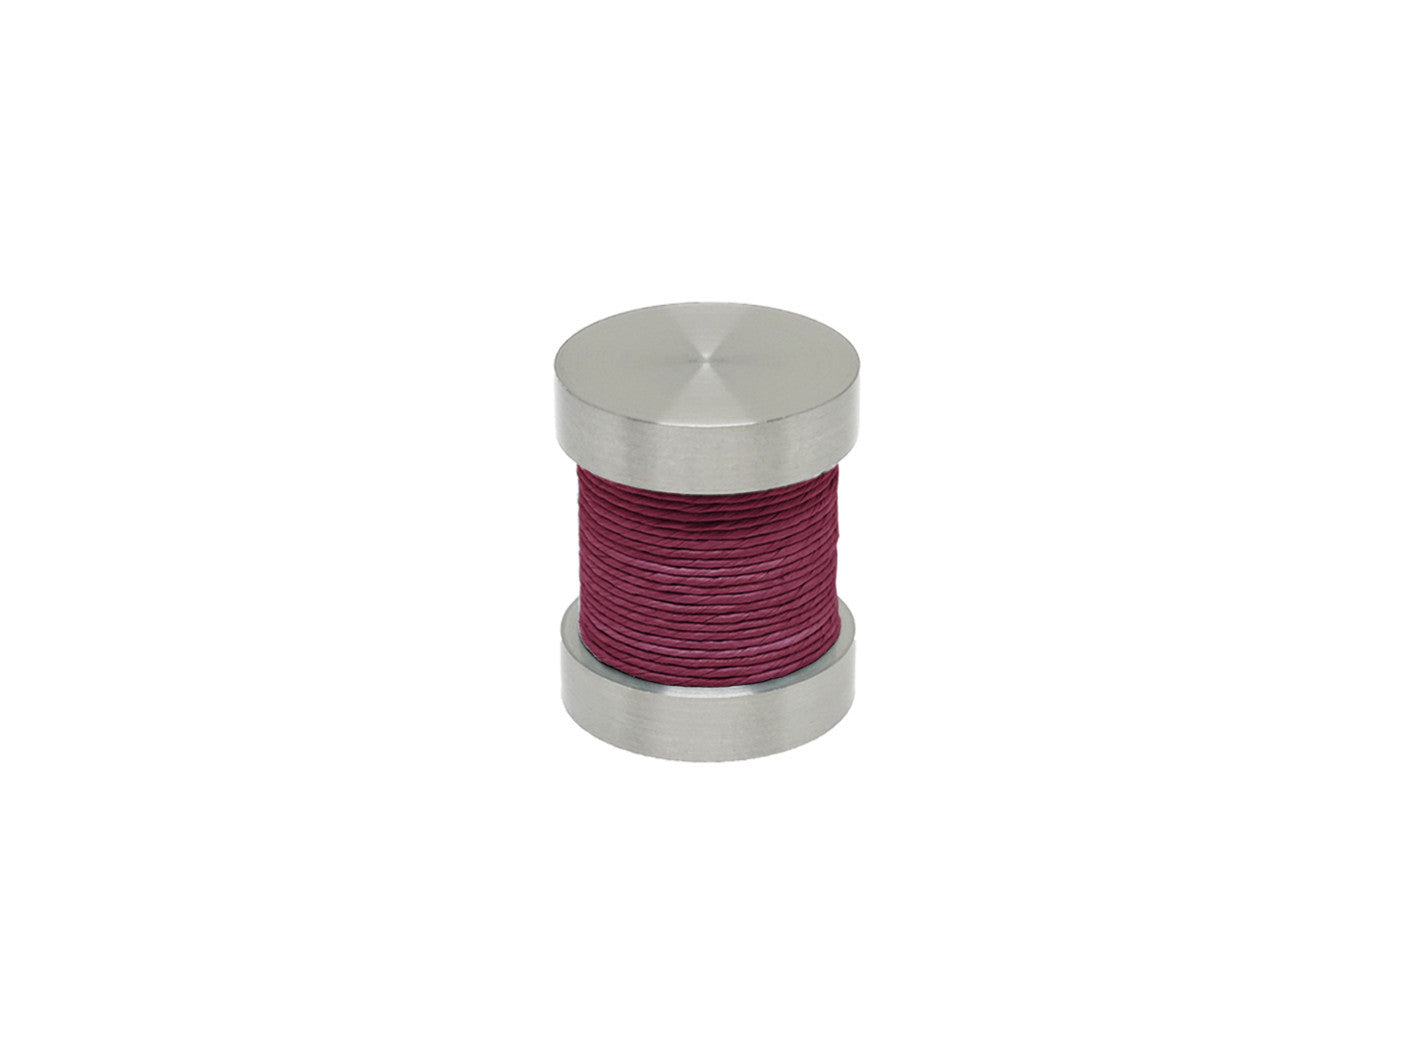 Loganberry purple coloured twine groove finial | Walcot House 30mm stainless steel collection